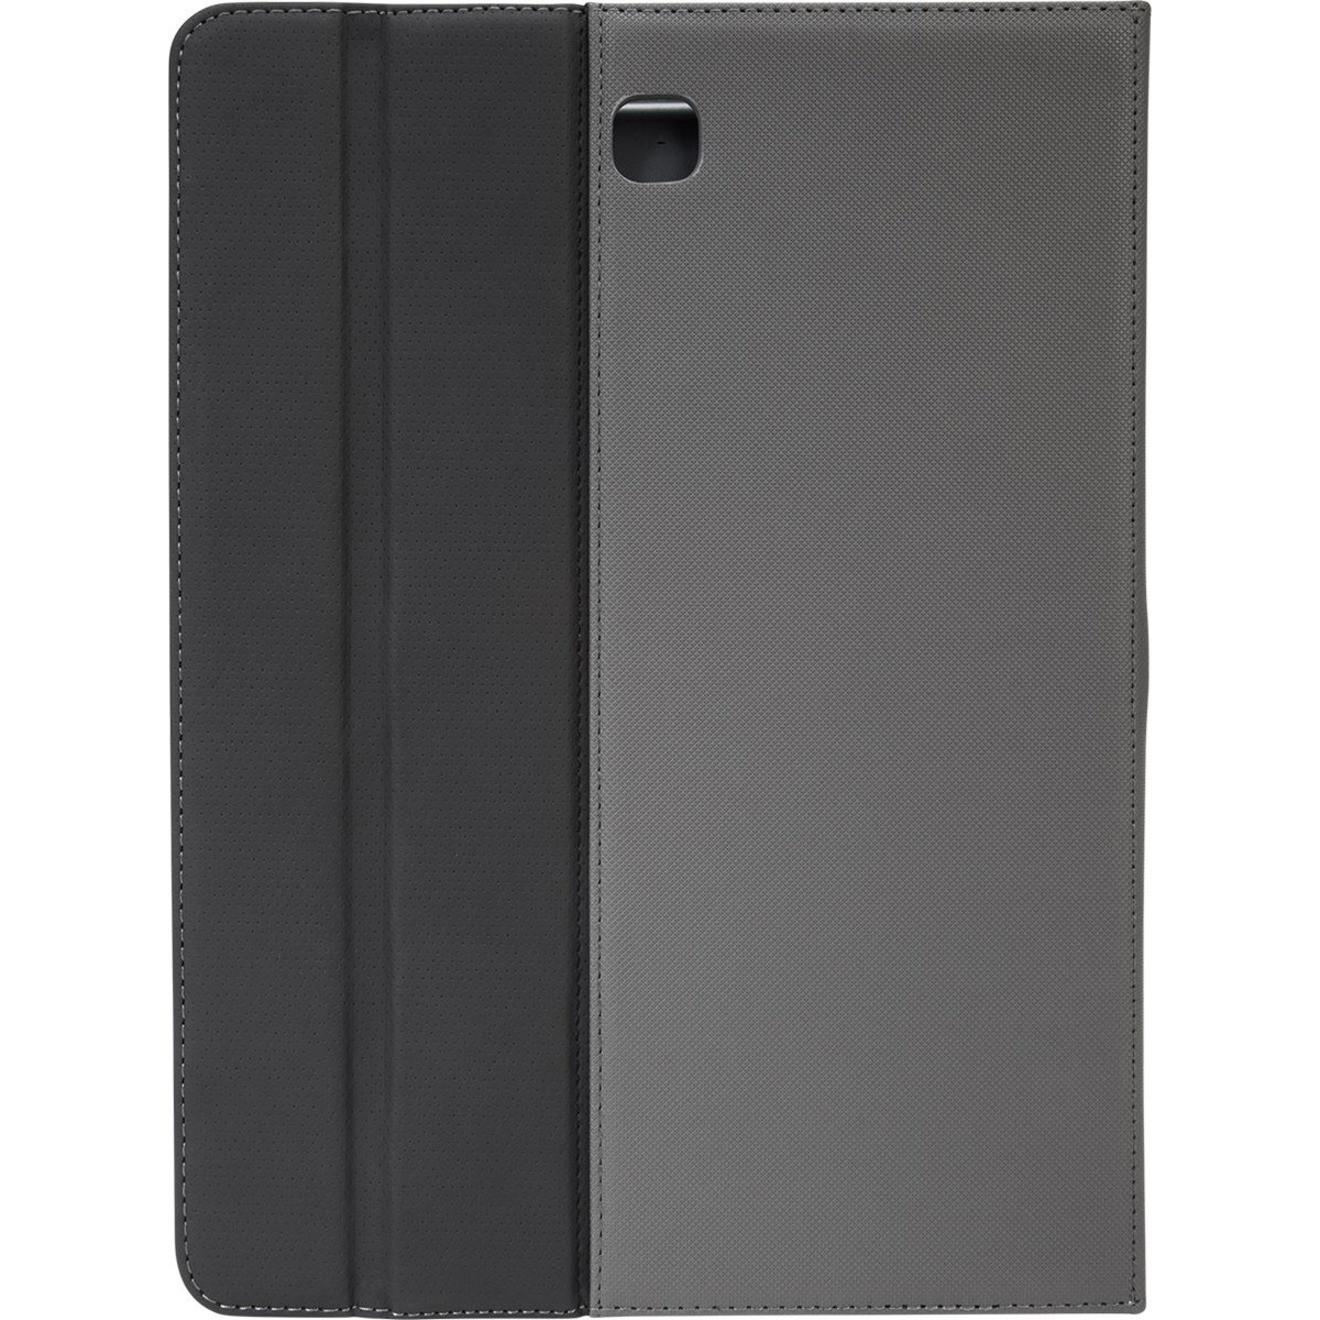 Targus Fit N’ Grip THZ59203US Carrying Case for 10″ iPad 2Gray12.8″ Height x 8″ Width x 6.4″ Depth THZ59203US